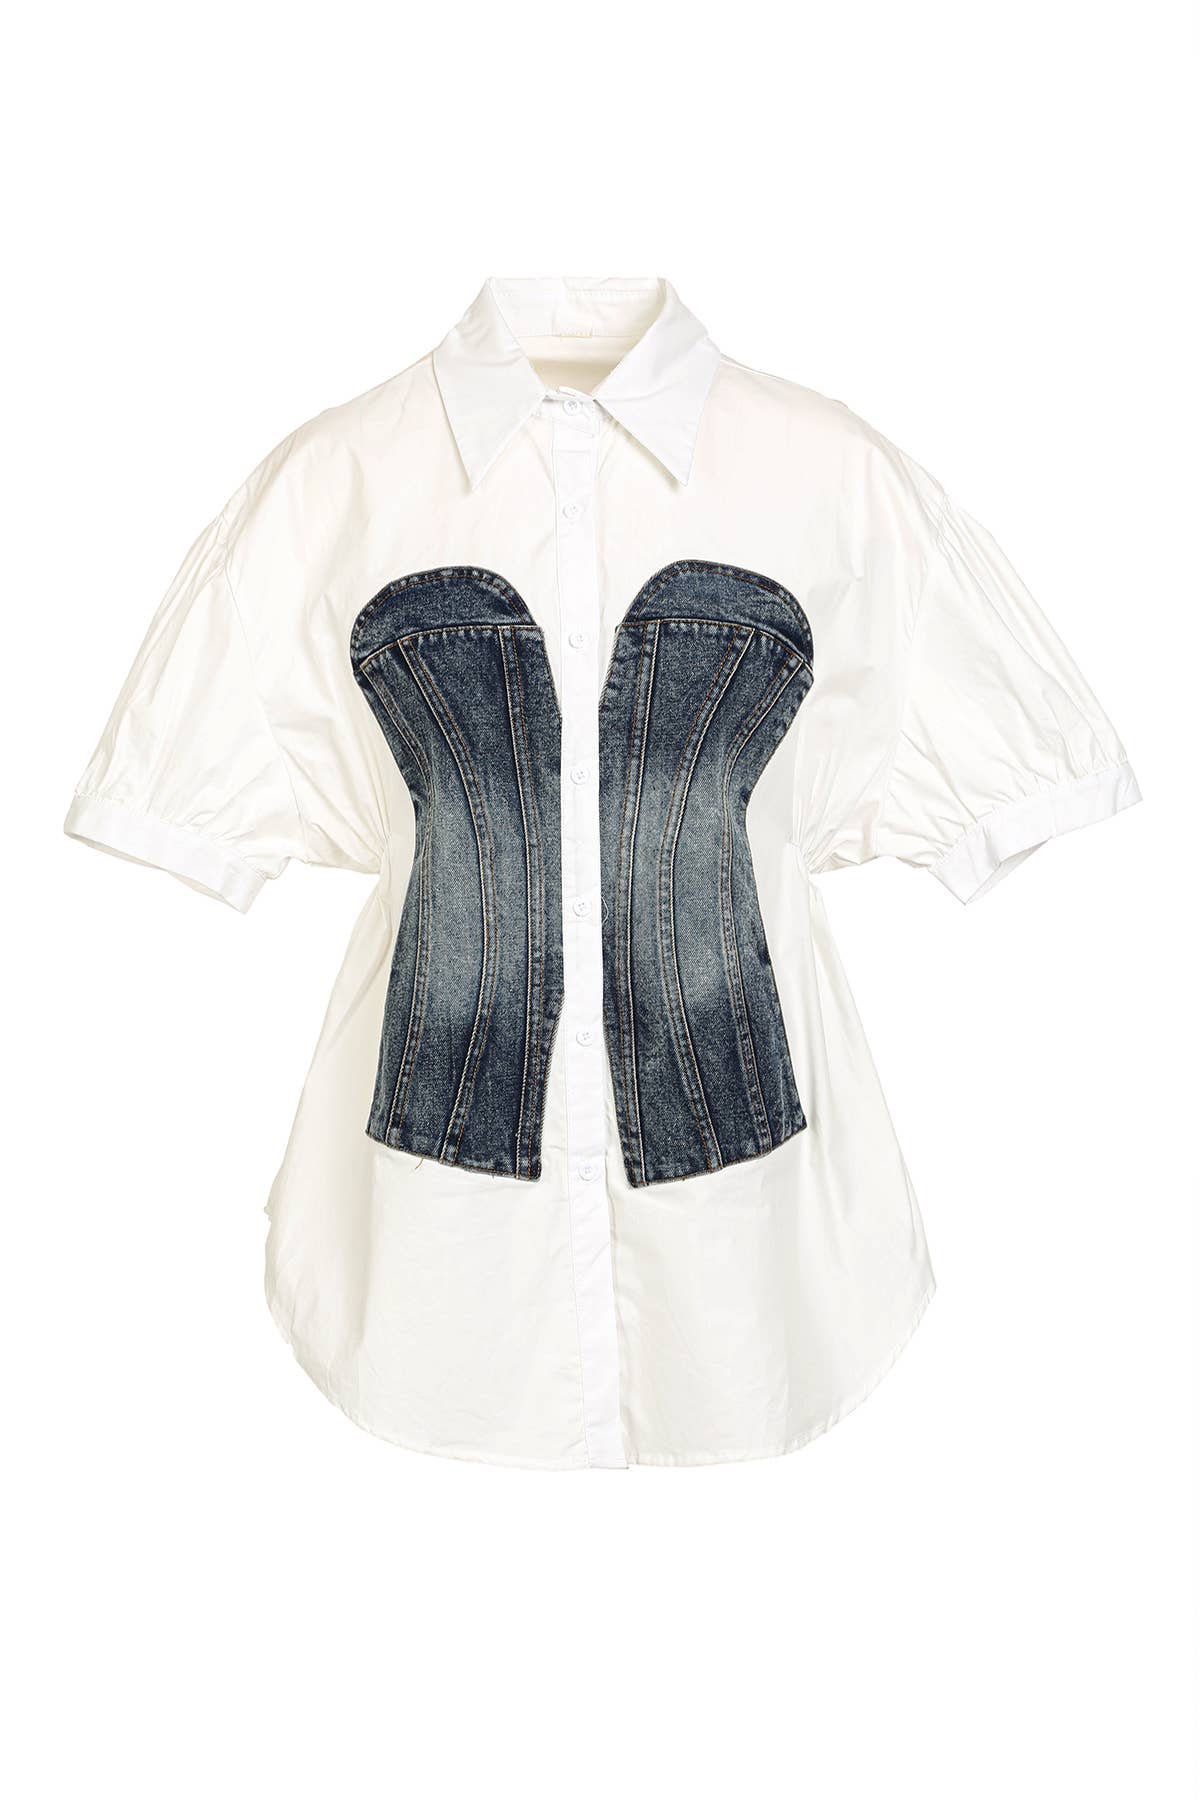 Beulah Style - Denim Cutout Ruched Button Up Blouse